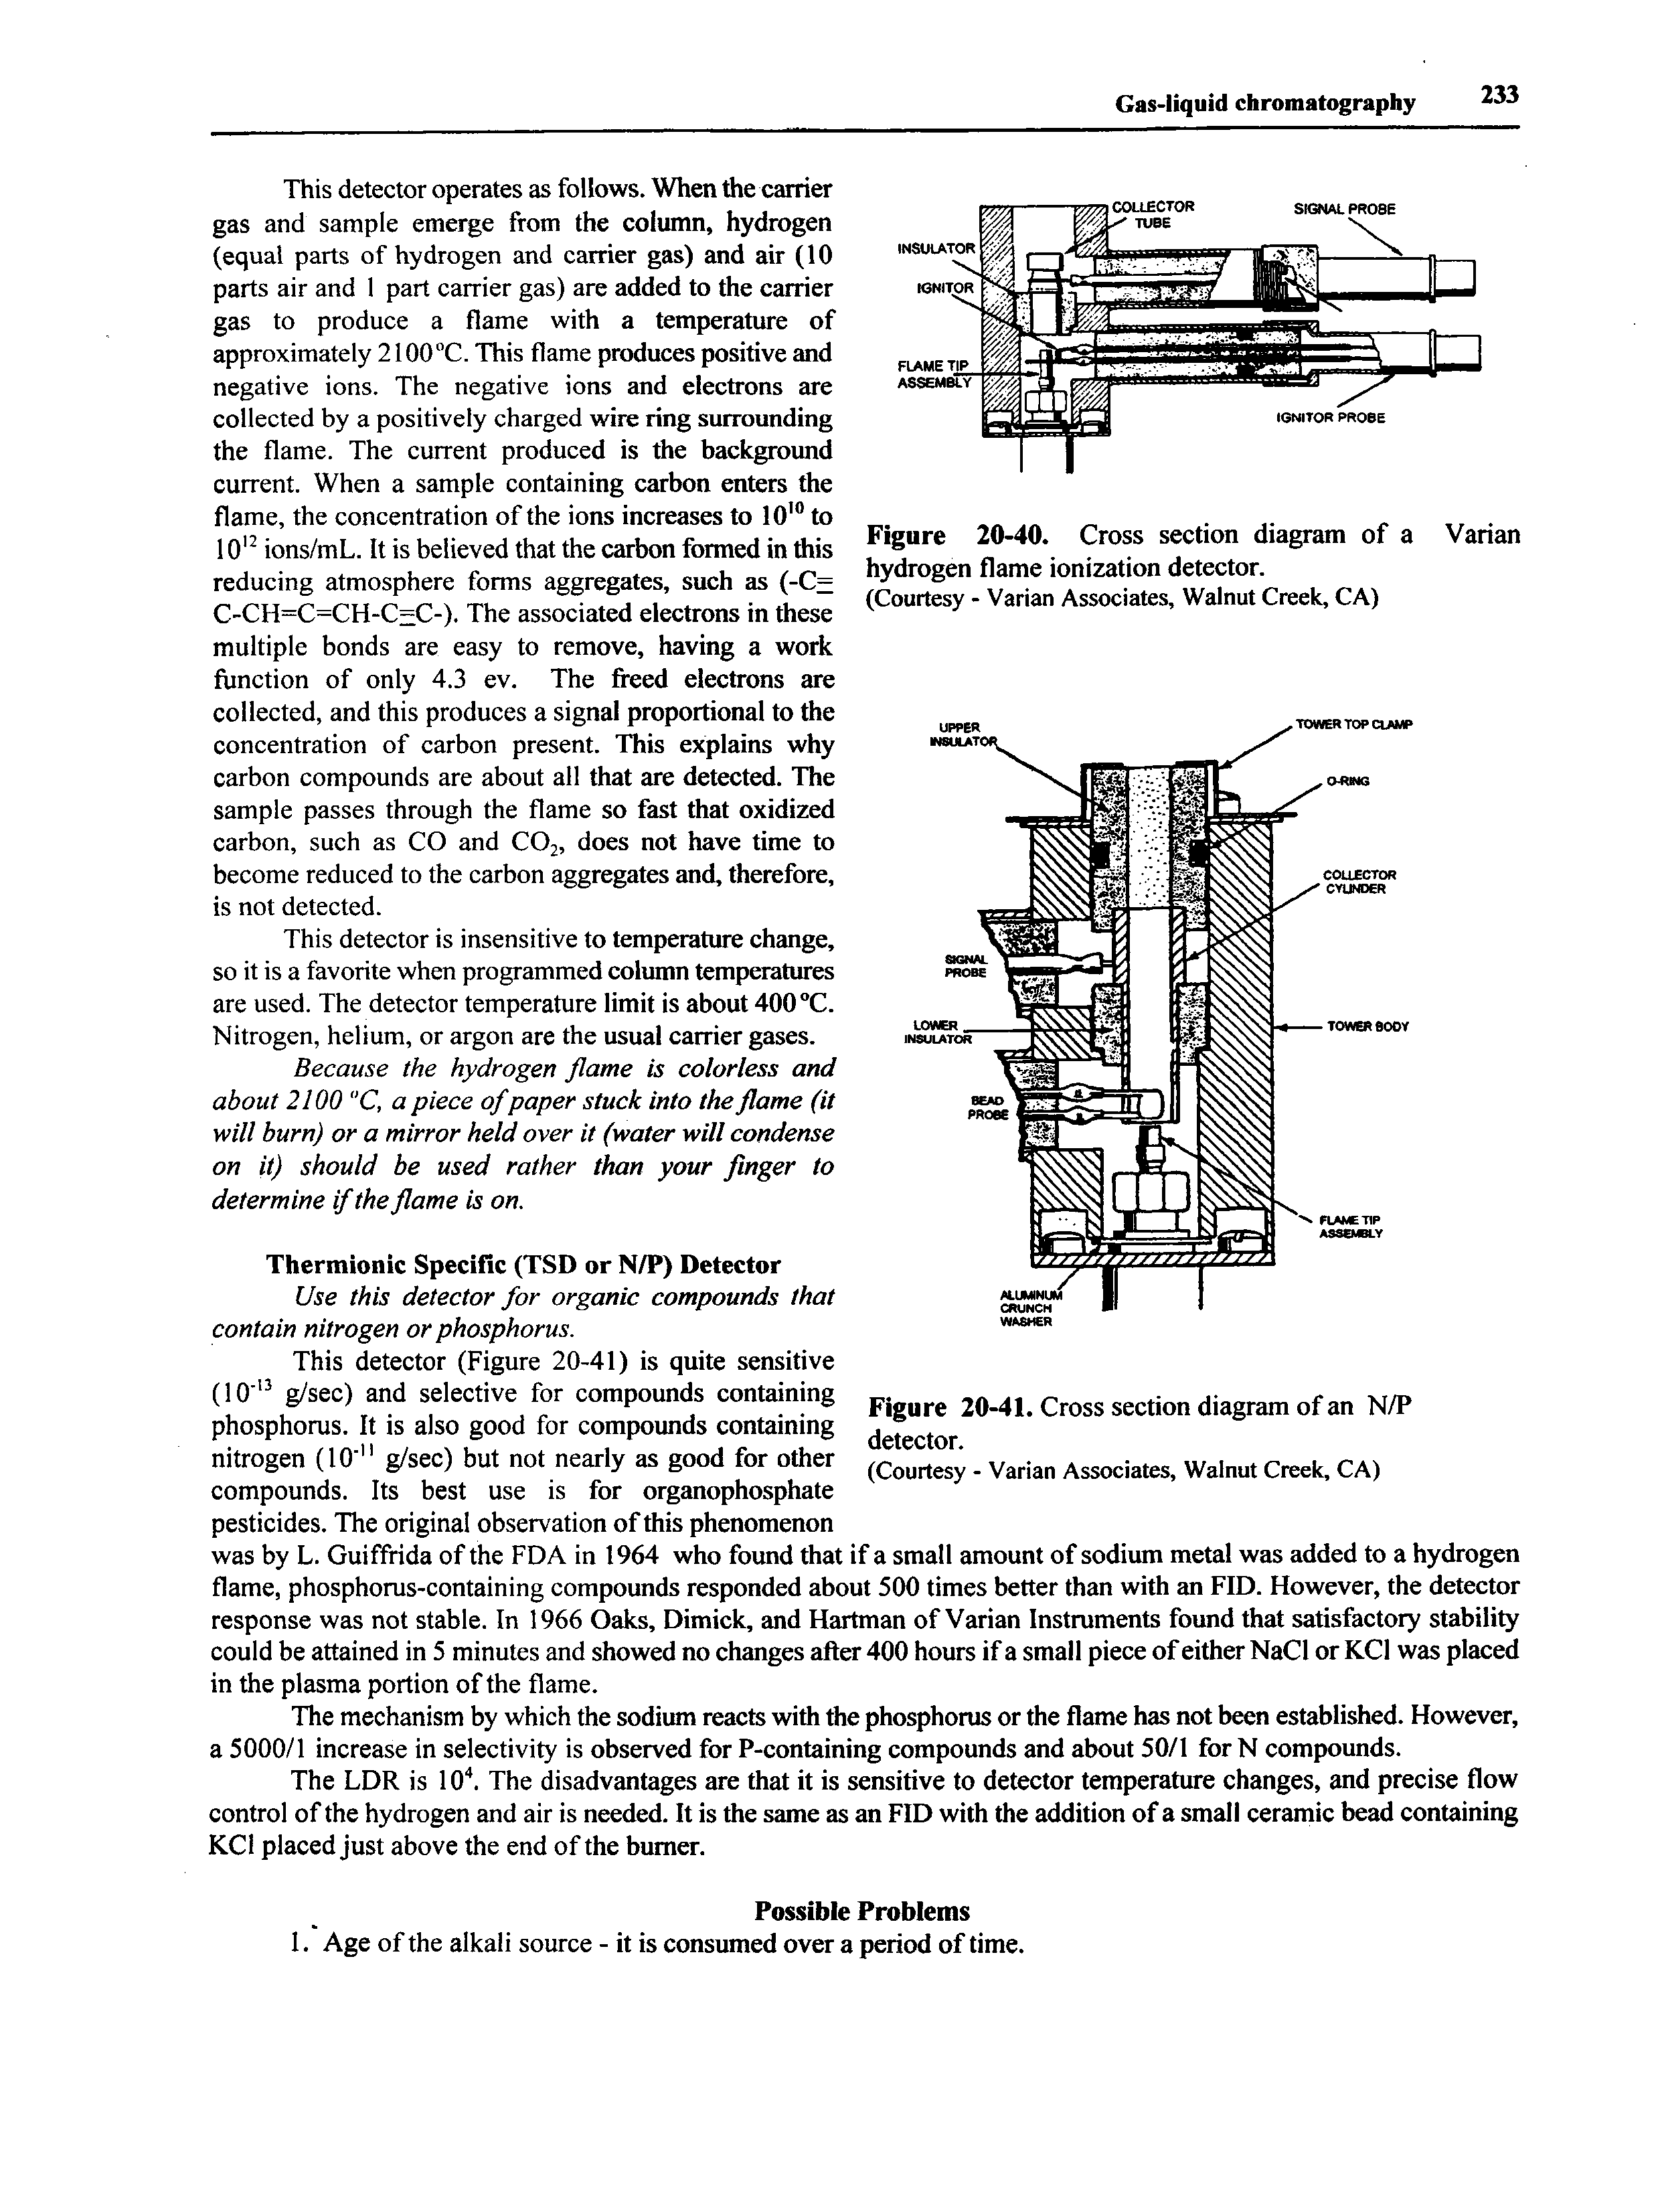 Figure 20-40. Cross section diagram of a Varian hydrogen flame ionization detector.